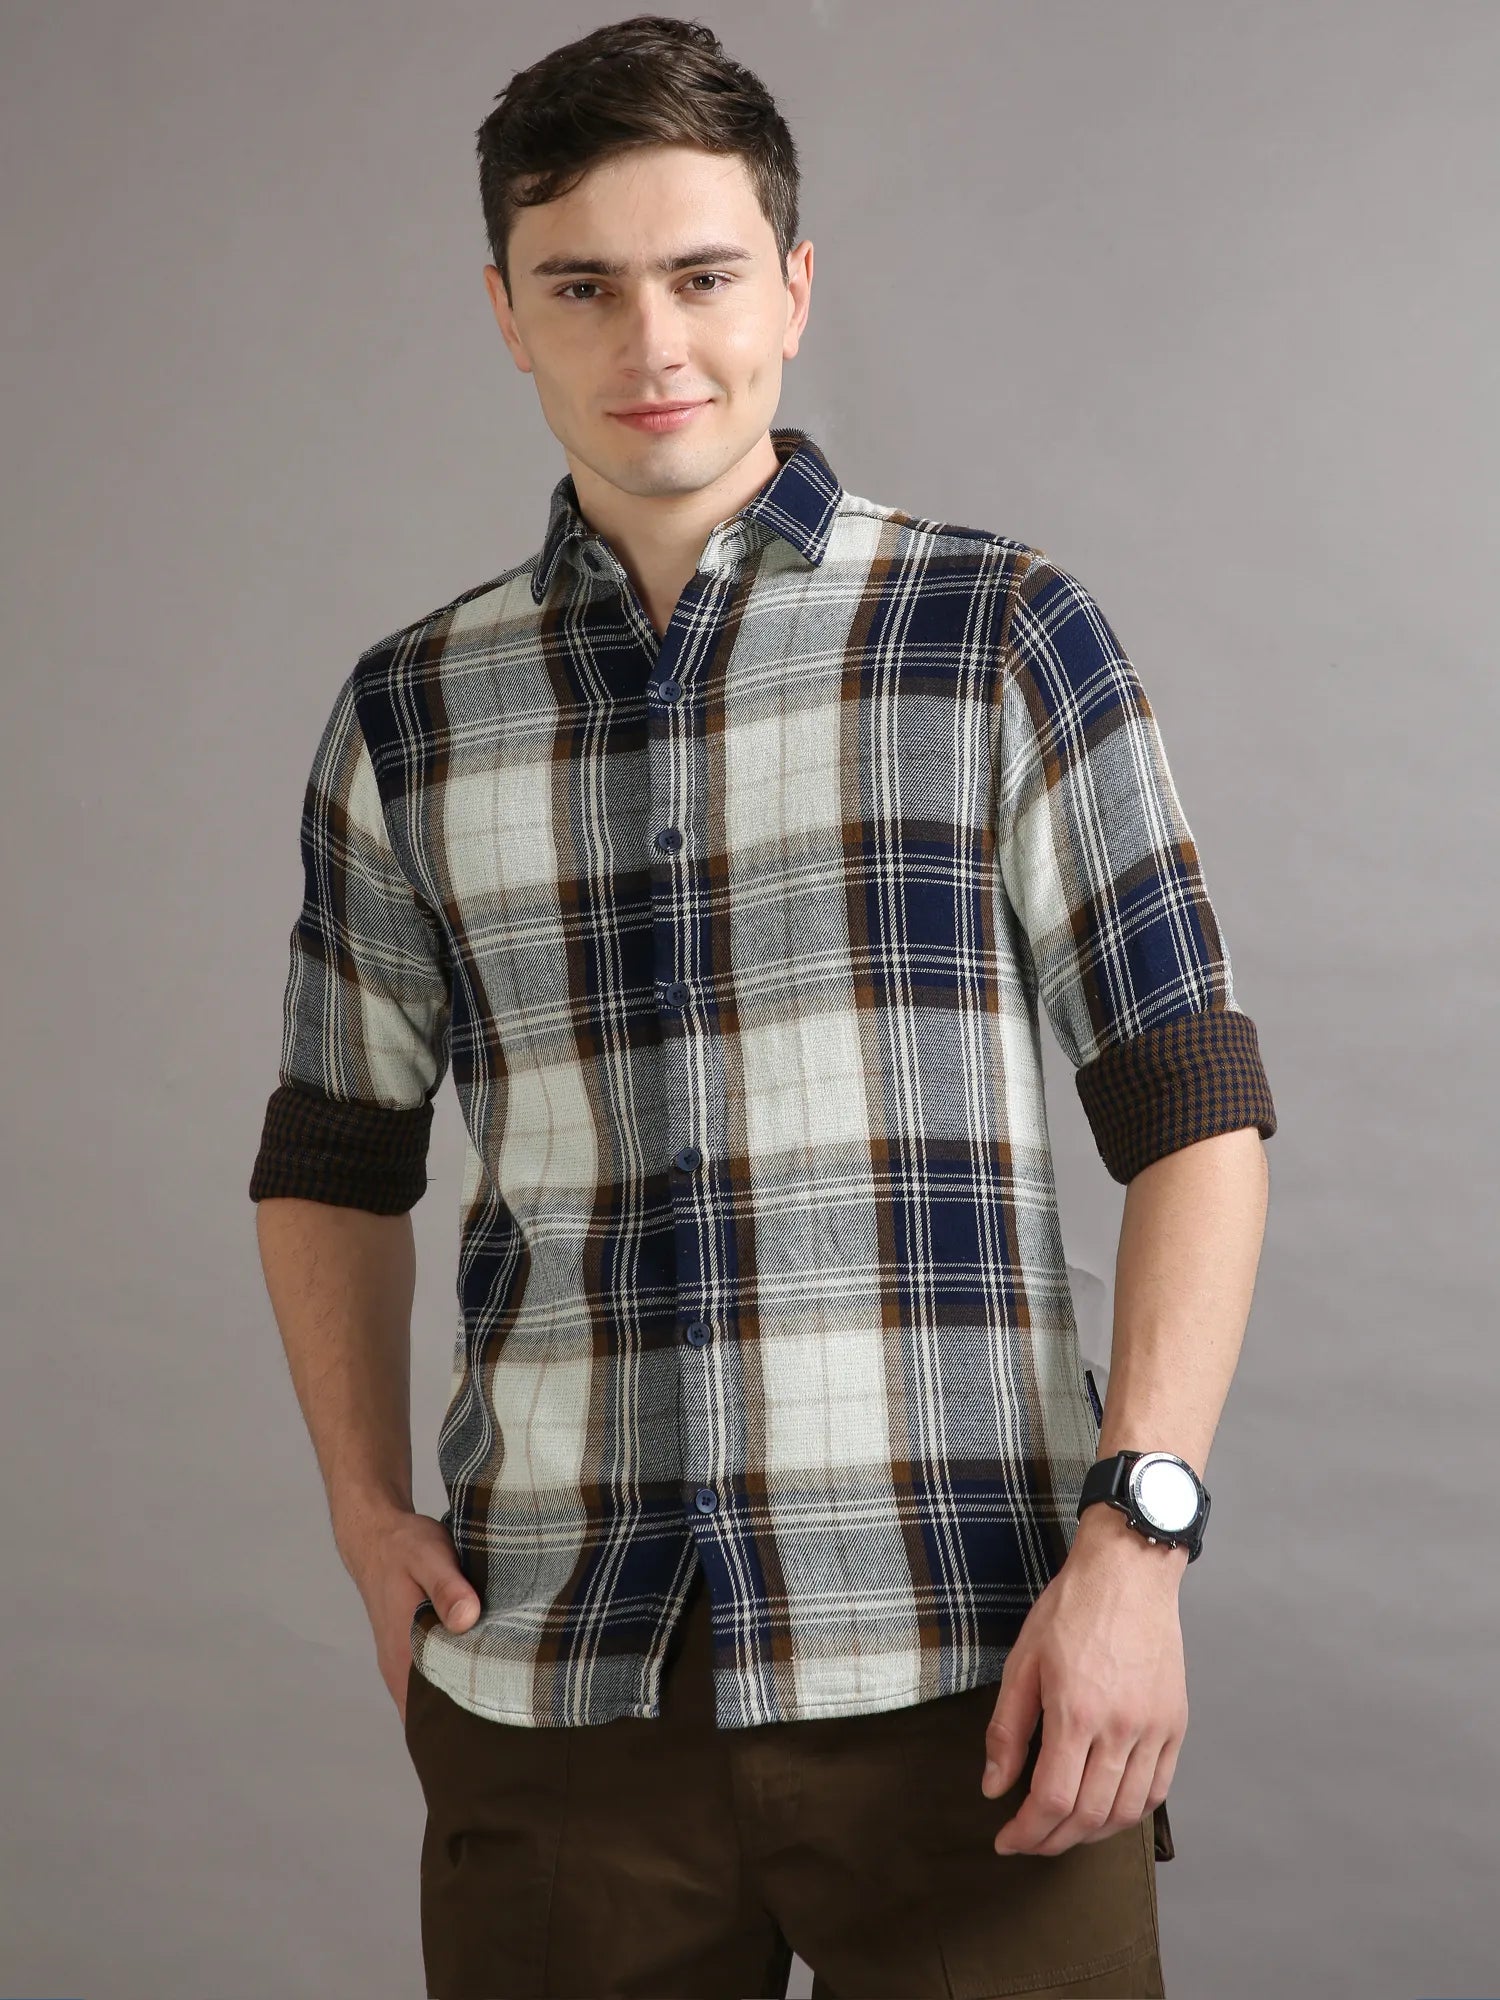 Bright and beaming Yellow Checkered Shirt for Men 